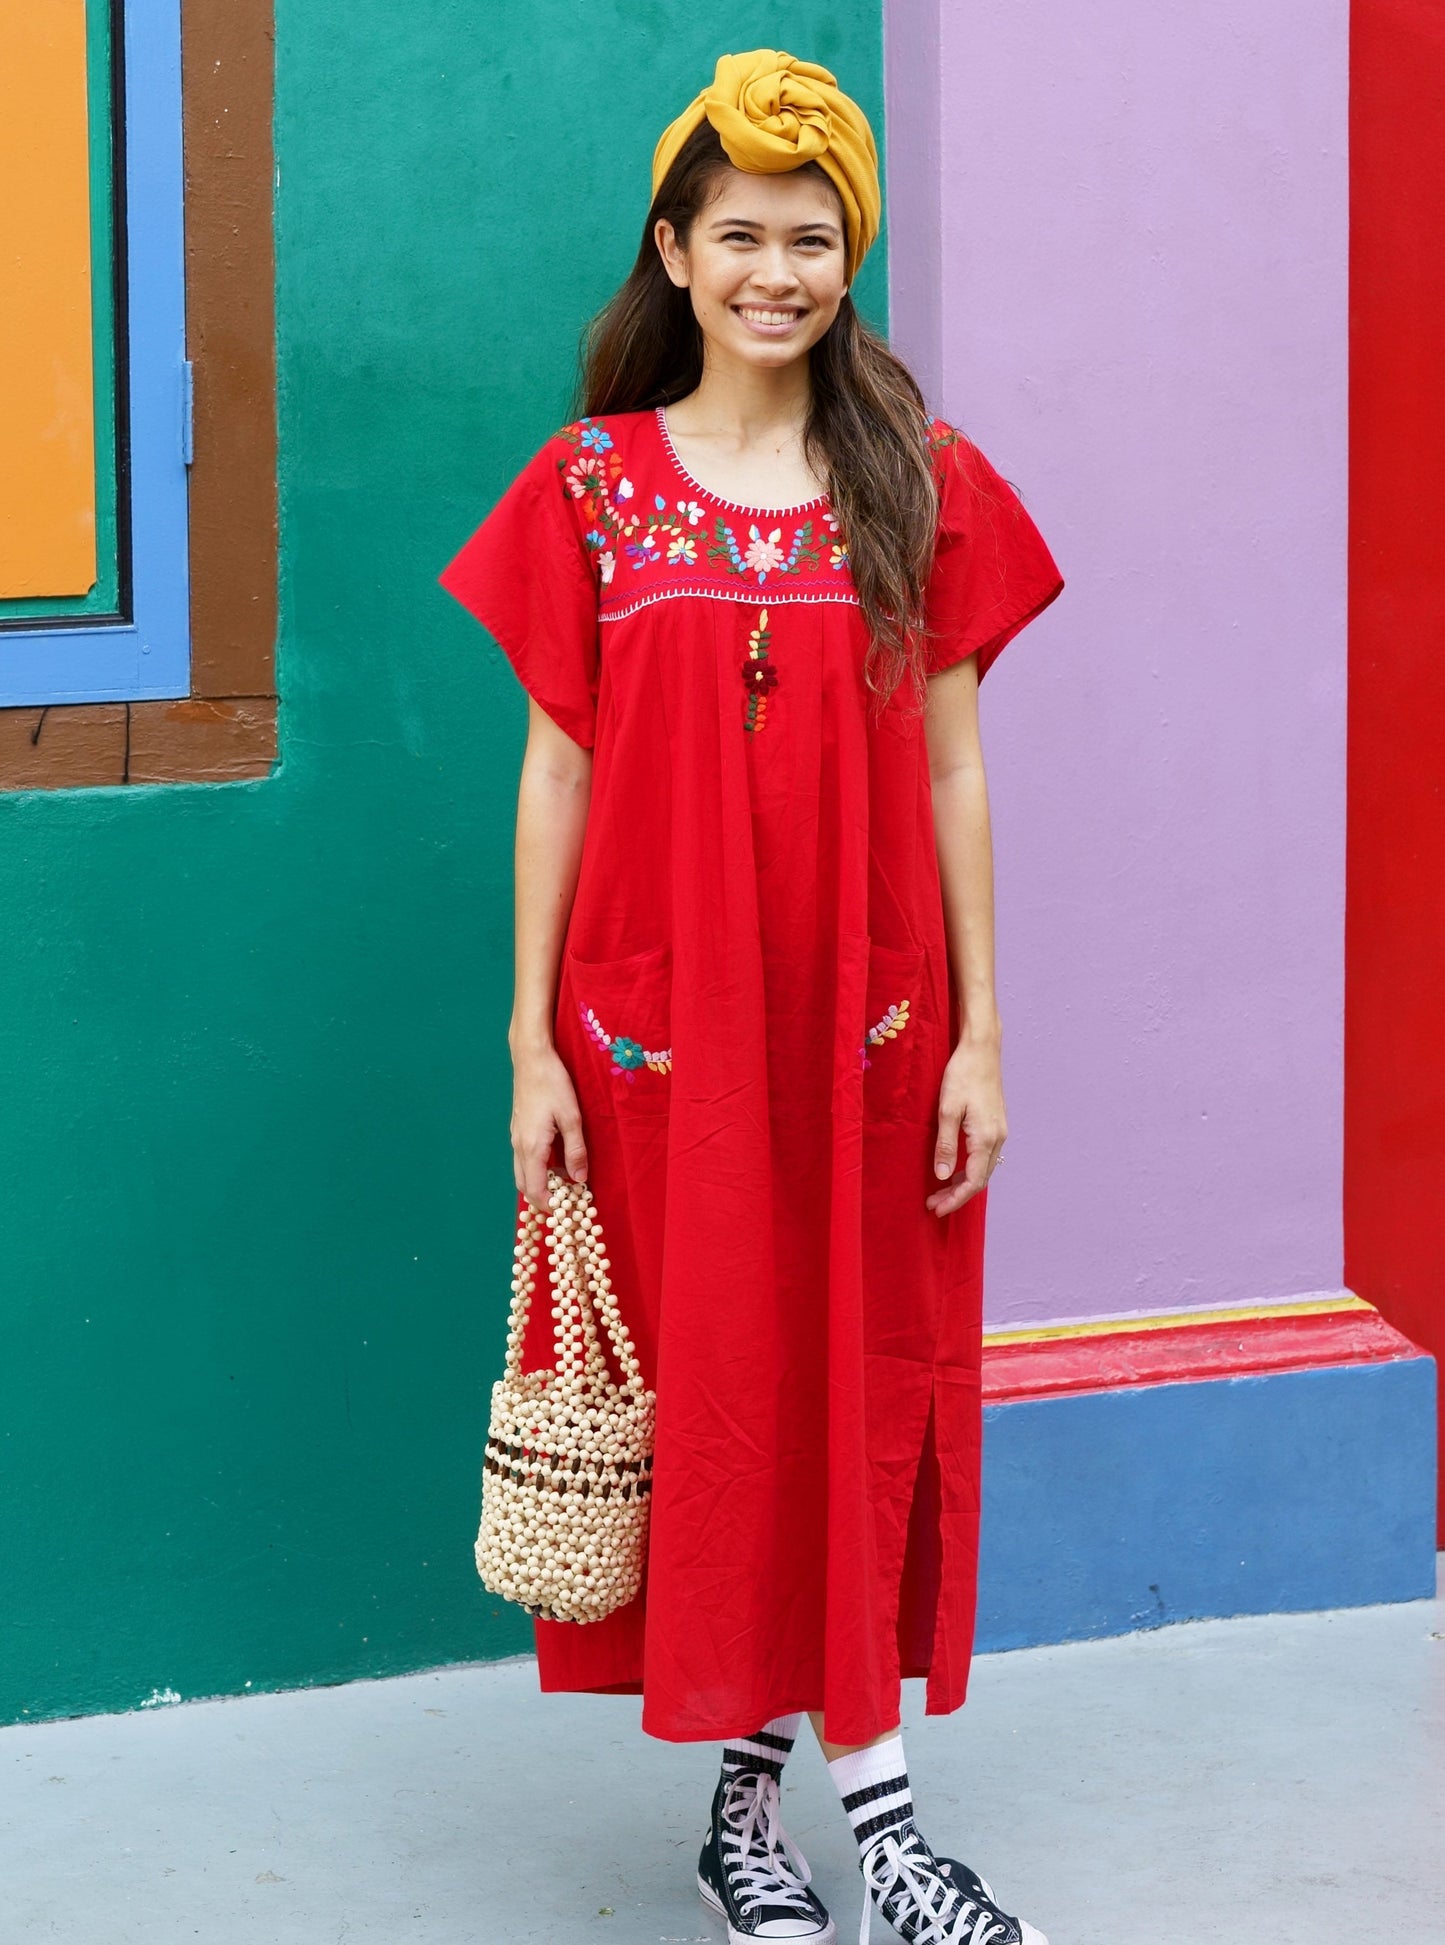 gabriela dress, Jamie-Lee, Kaftan, resort wear, mexican dress, red dress, adult fashion, embroidery, give back, made in india, hand sewn by women, beach dress, ethnic fashion, baebeeboo, shopbaebeeboo, twinning outfit, twinning set, mommy and daughter